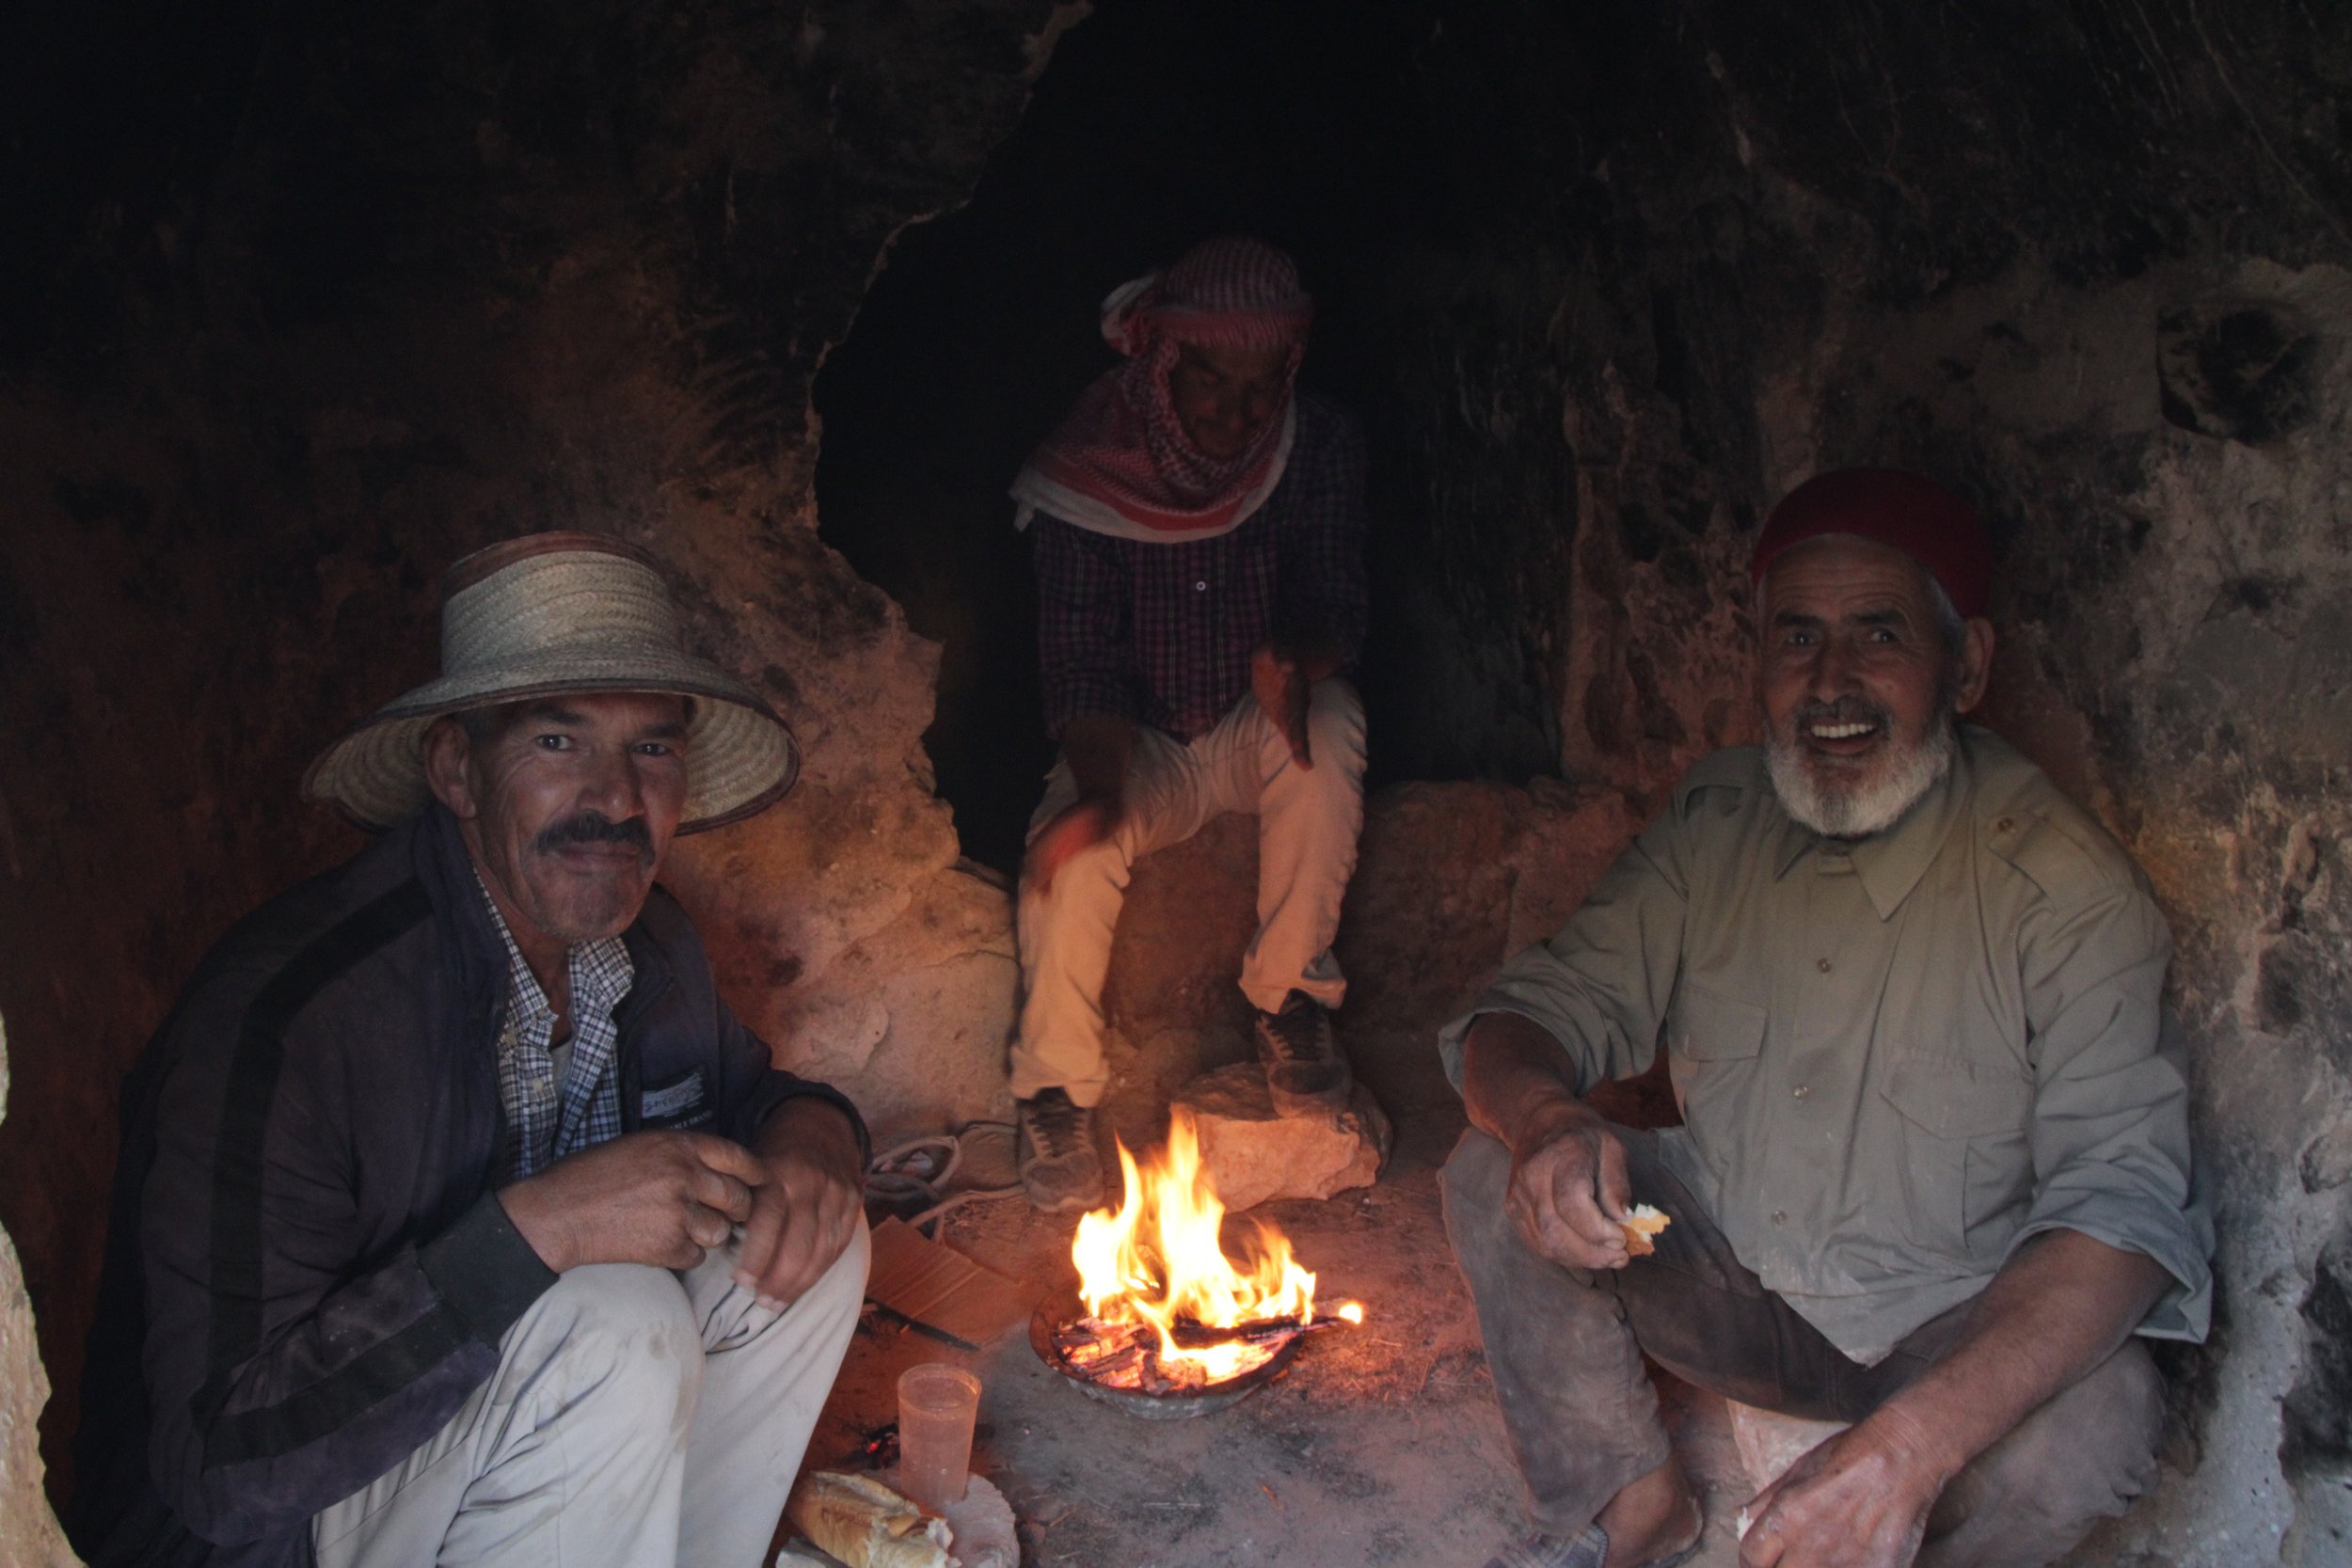  NOVEMBER 19th, 2022. PICTURED: Three men have breakfast inside a Ghorfa. PC: Andrew Corbley © 